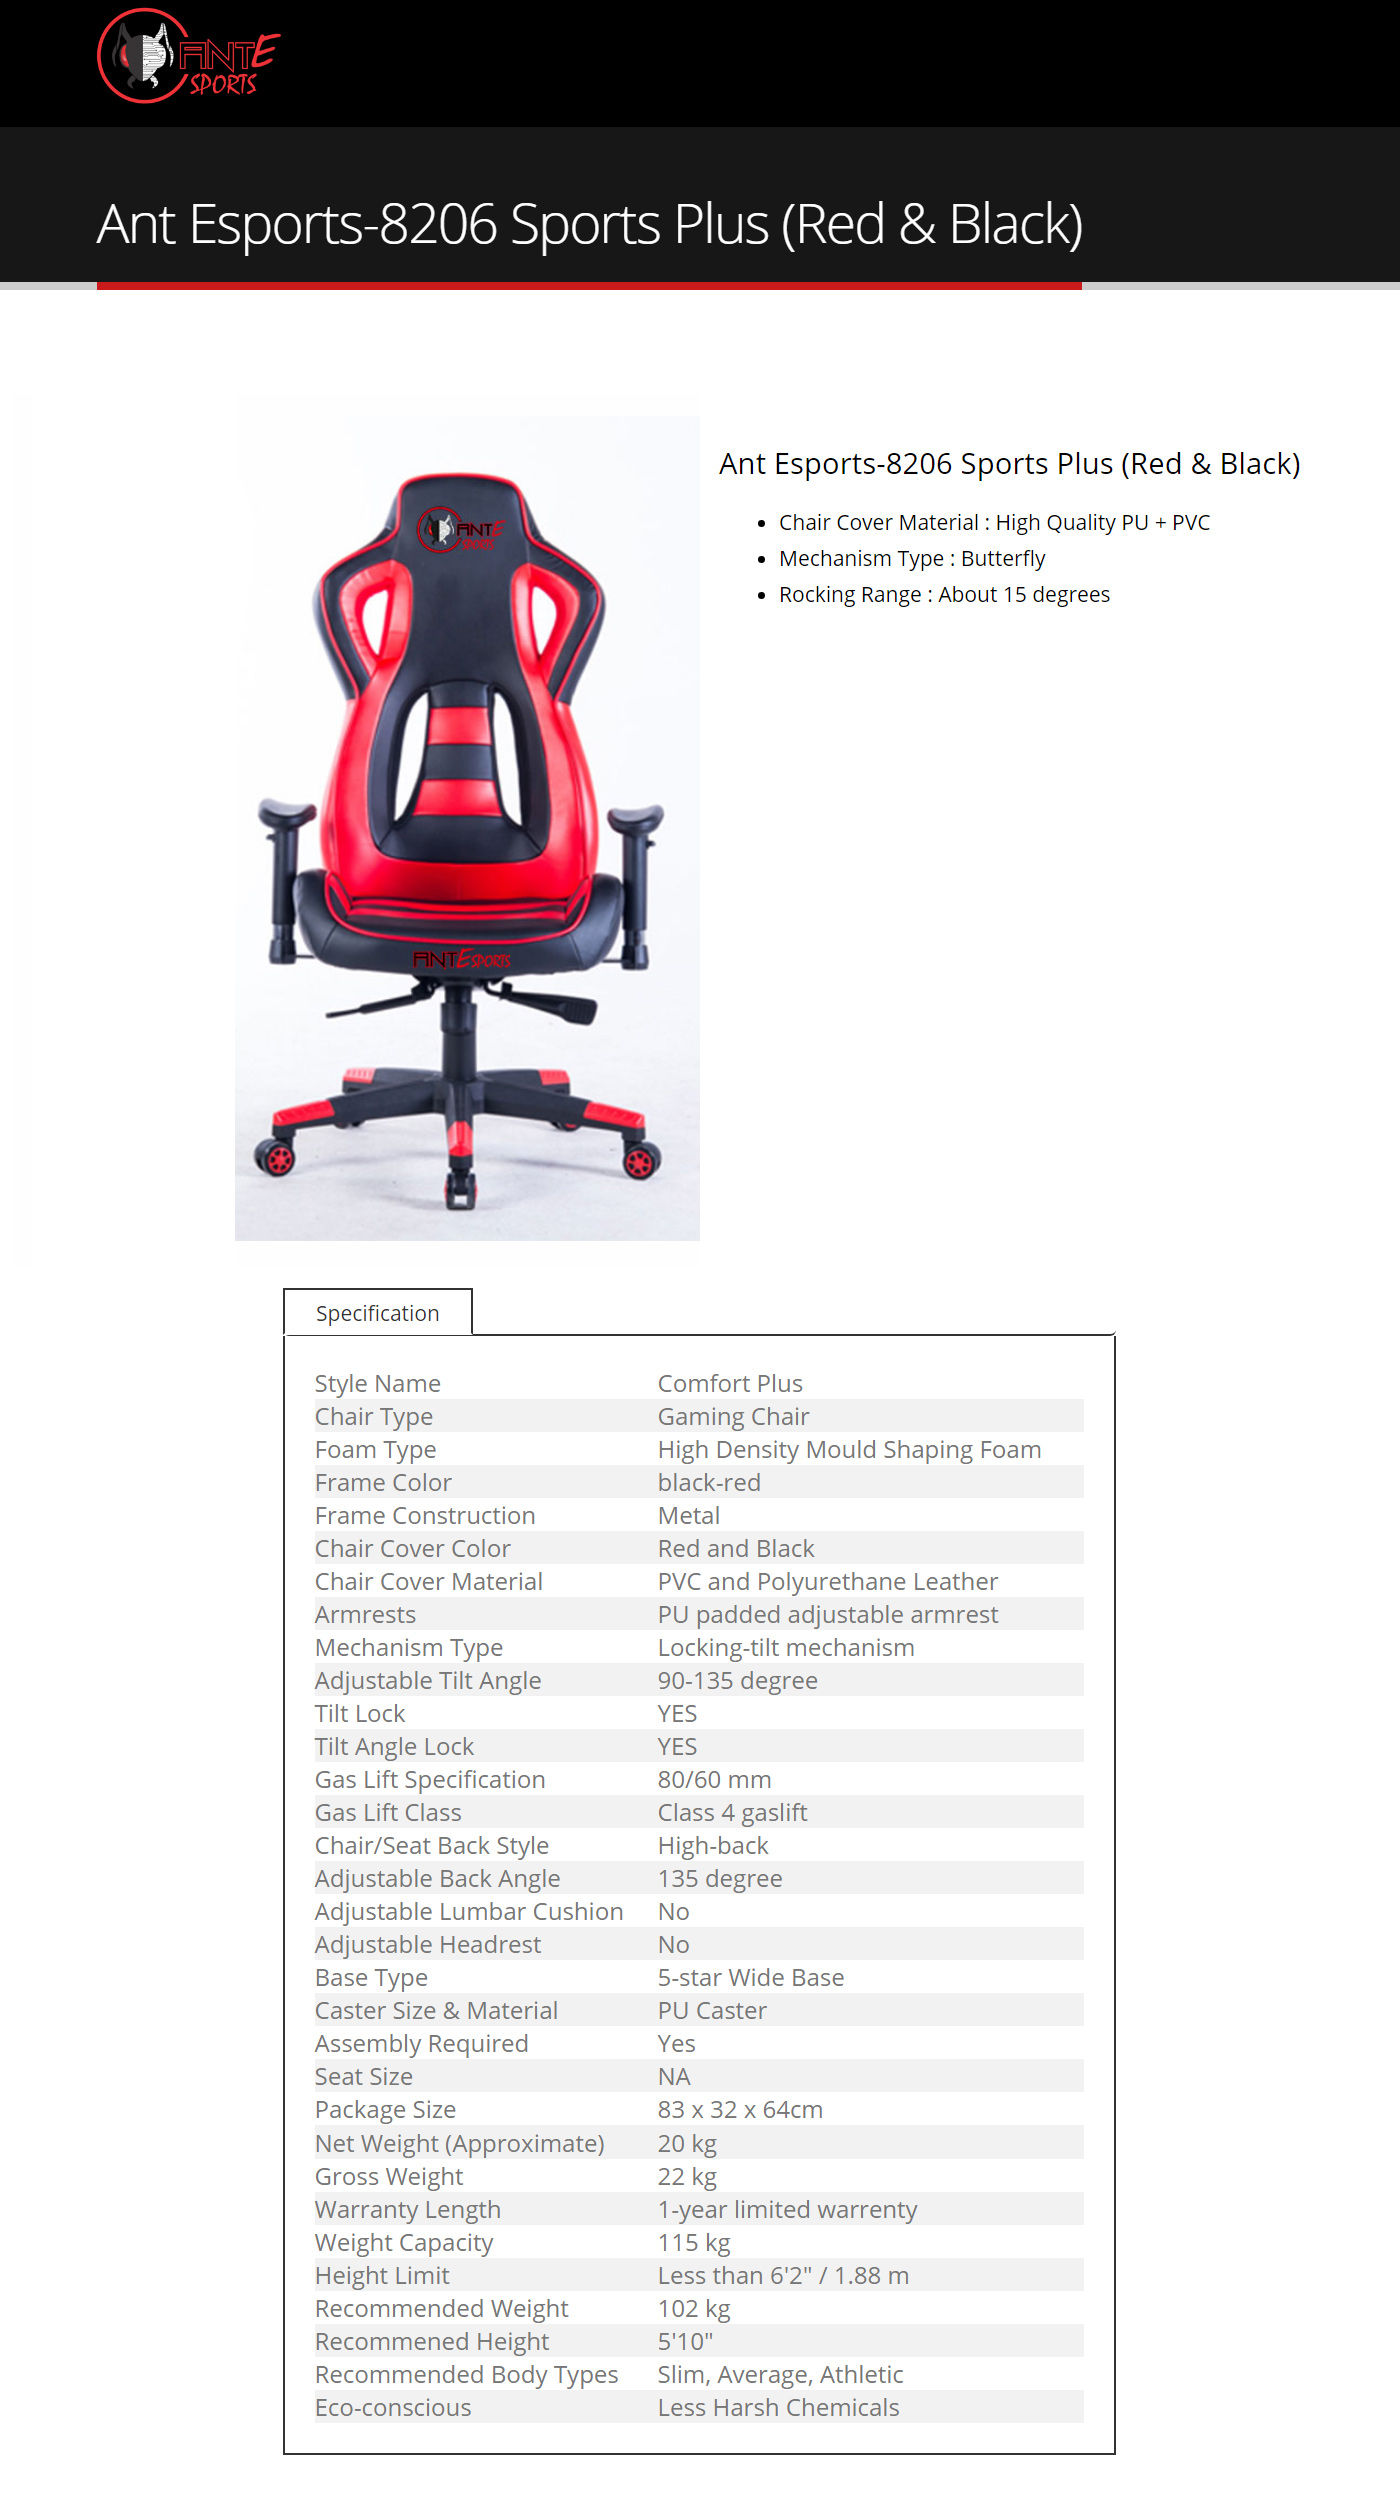  Buy Online Ant Esports 8206 Gaming Chair - Red and Black